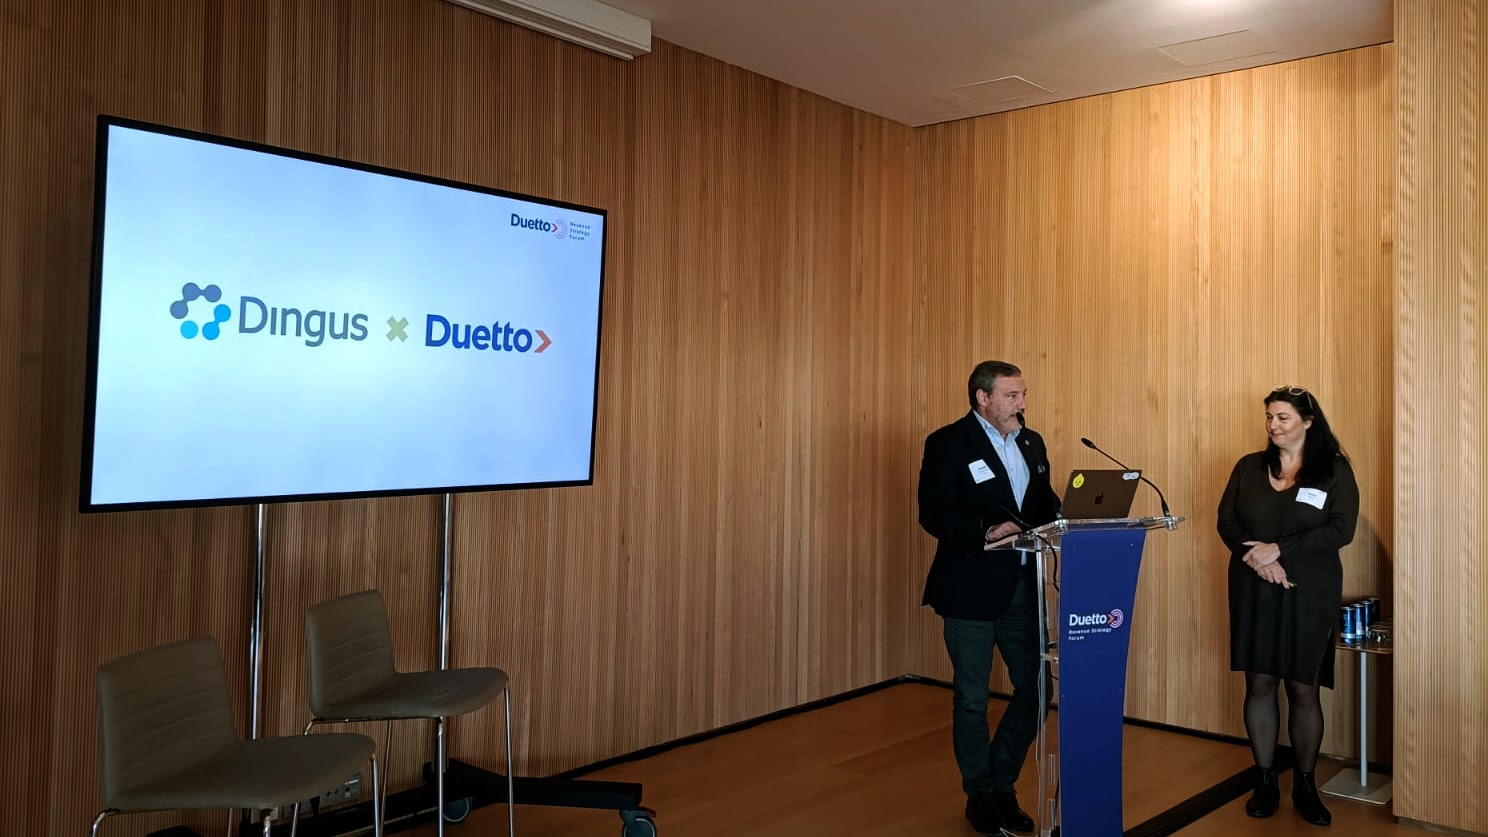 Duetto and Dingus announced an Strategic Technology Partnership during Duetto Revenue Strategy Forum in Palma